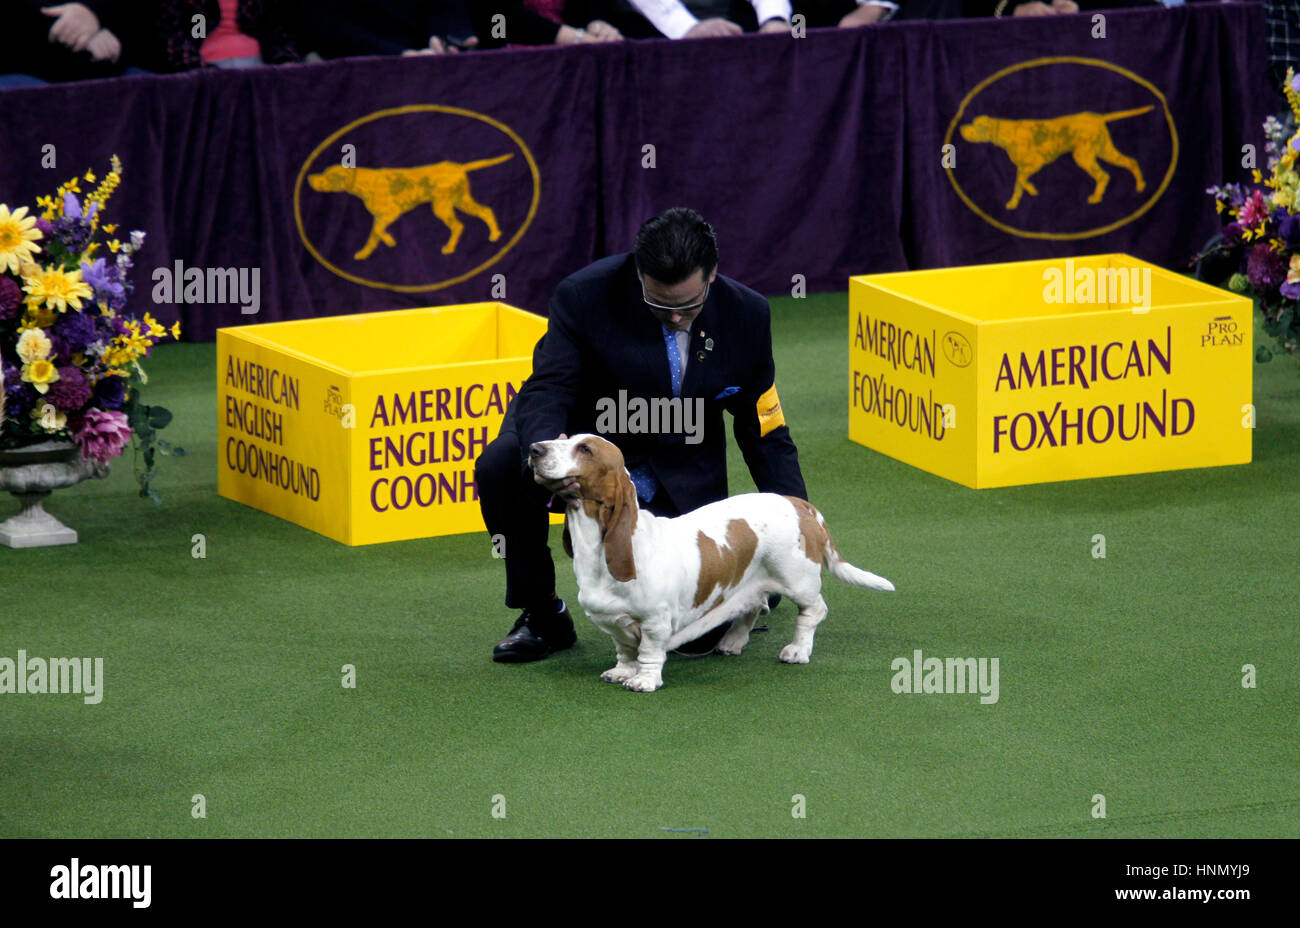 New York, United States. 13th Feb, 2017. "GCH CH Blossomhil's Topsfield Sanchu A Little Princess", A Basset Hound preparing to be inspected during competition in the Toy Division at the 141st Annual Westminster Dog Show at Madison Square Garden in New York City on February 13th, 2017. Credit: Adam Stoltman/Alamy Live News Stock Photo